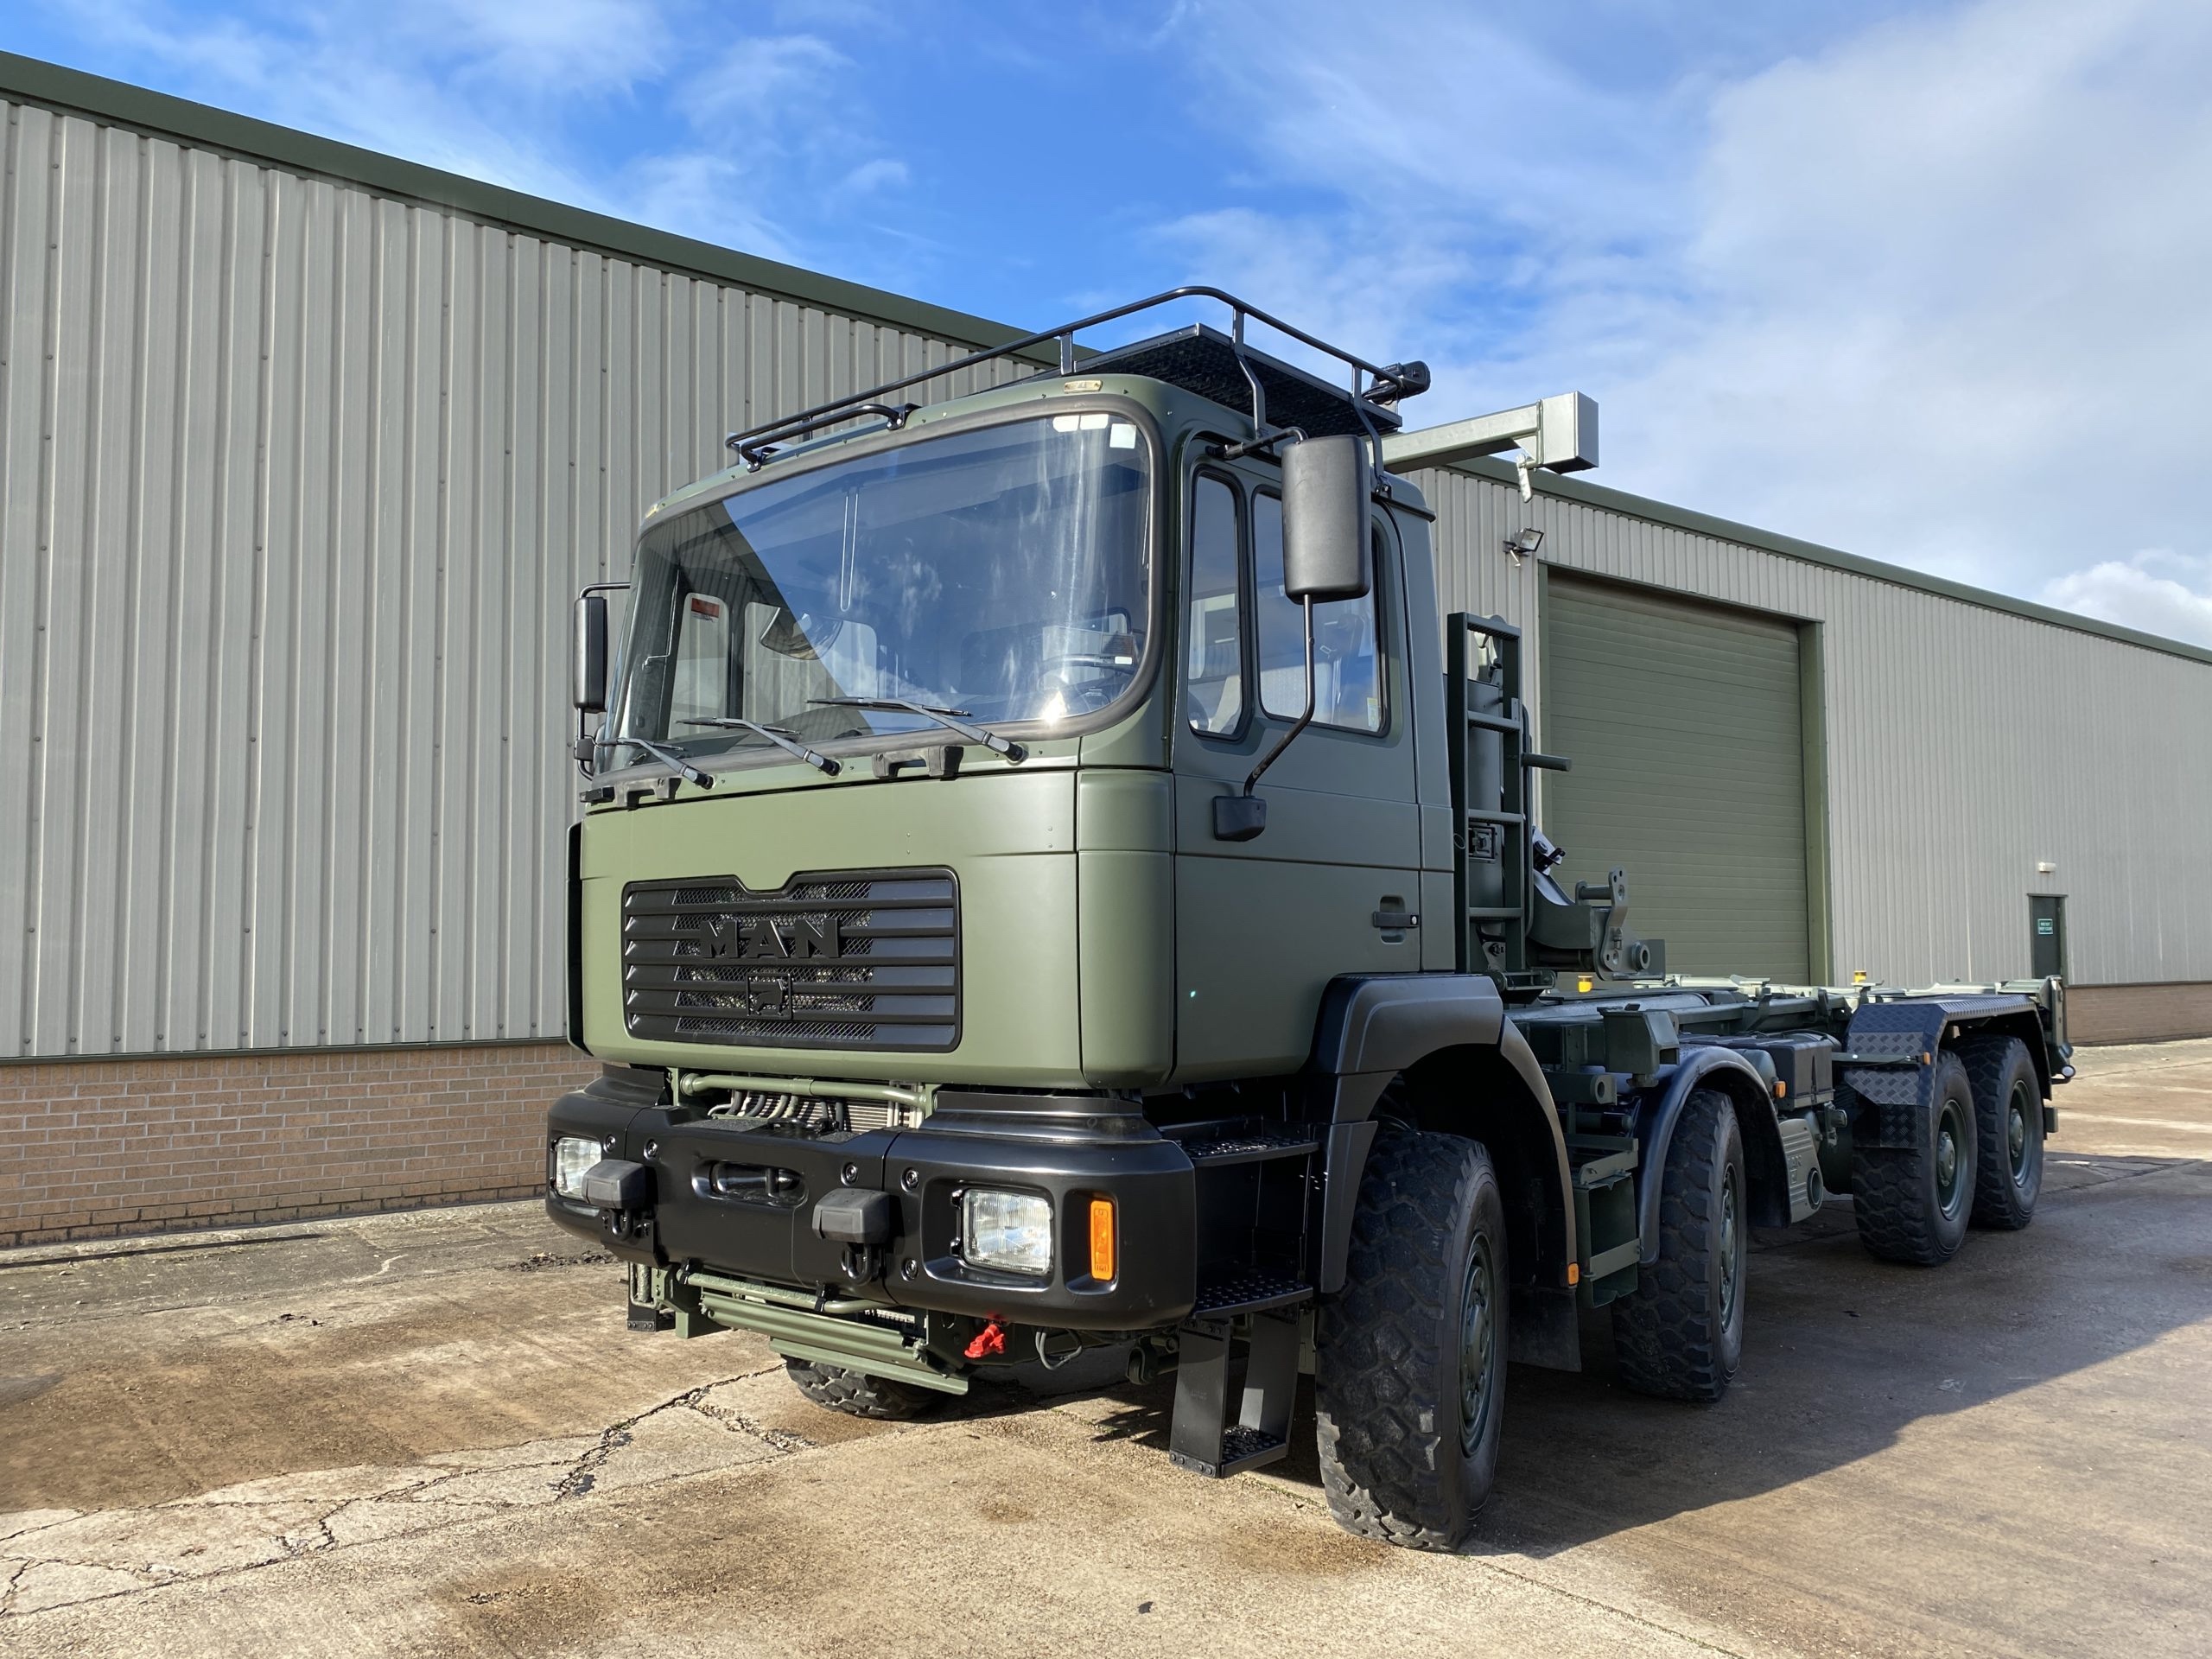 MAN 35.464 8??8 Drops Truck - 50400 - Govsales of mod surplus ex army trucks, ex army land rovers and other military vehicles for sale